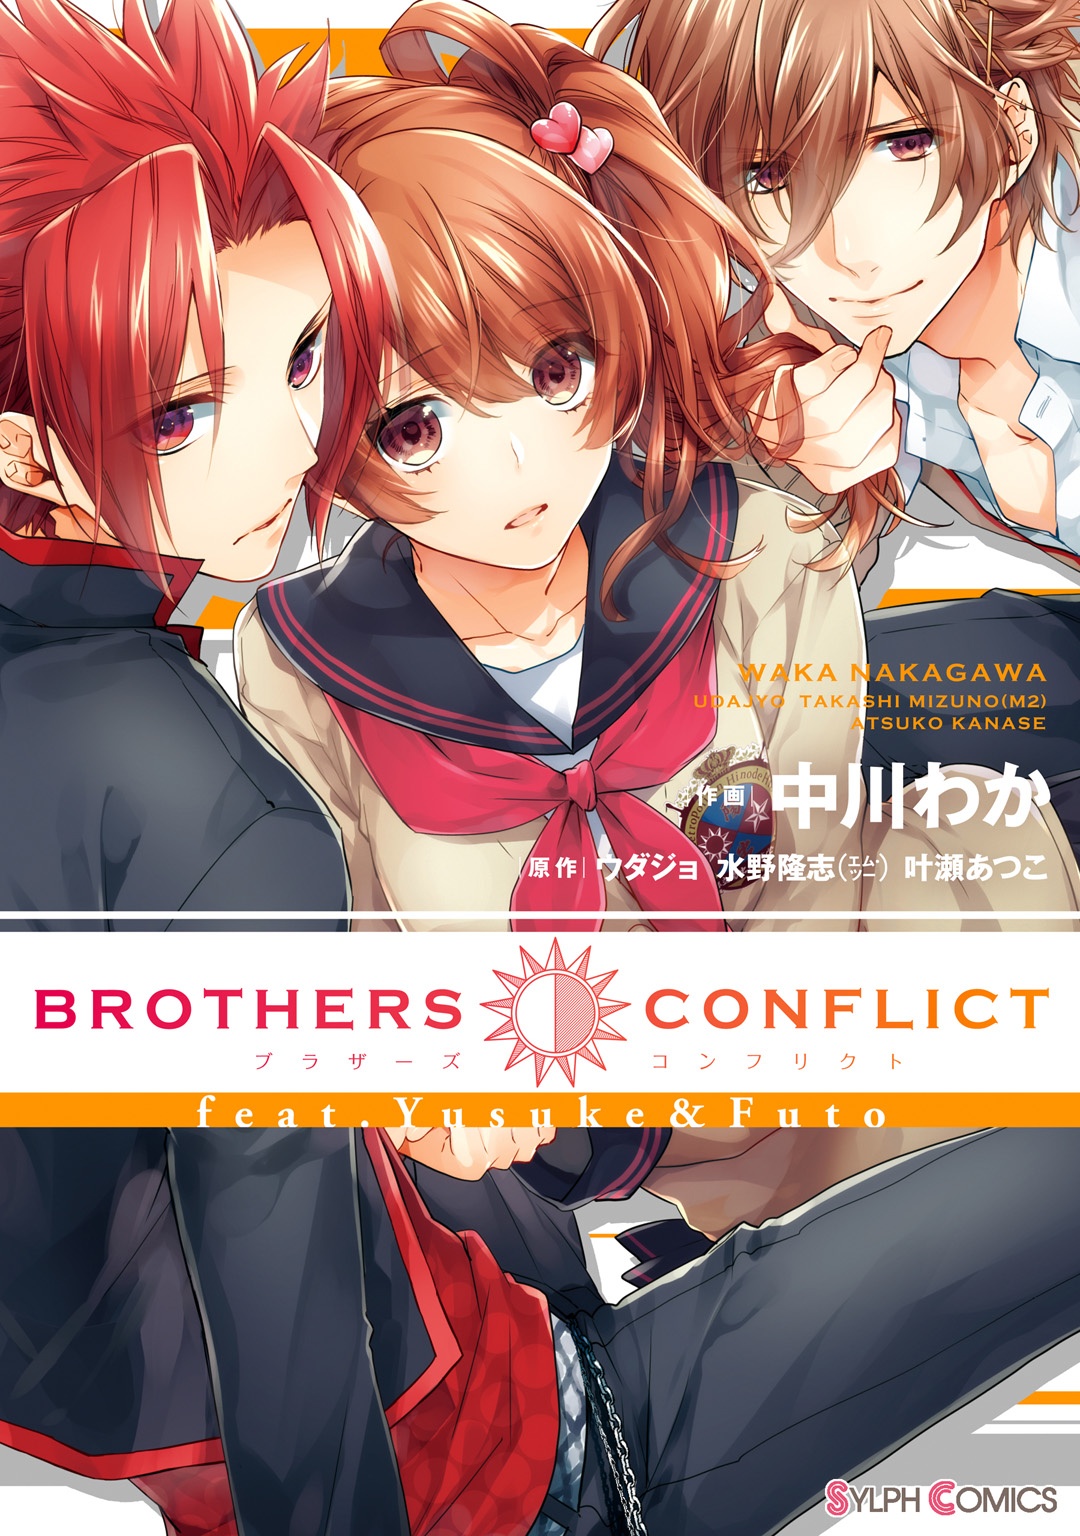 Brothers Conflict feat. Yusuke & Futo Scan ITA